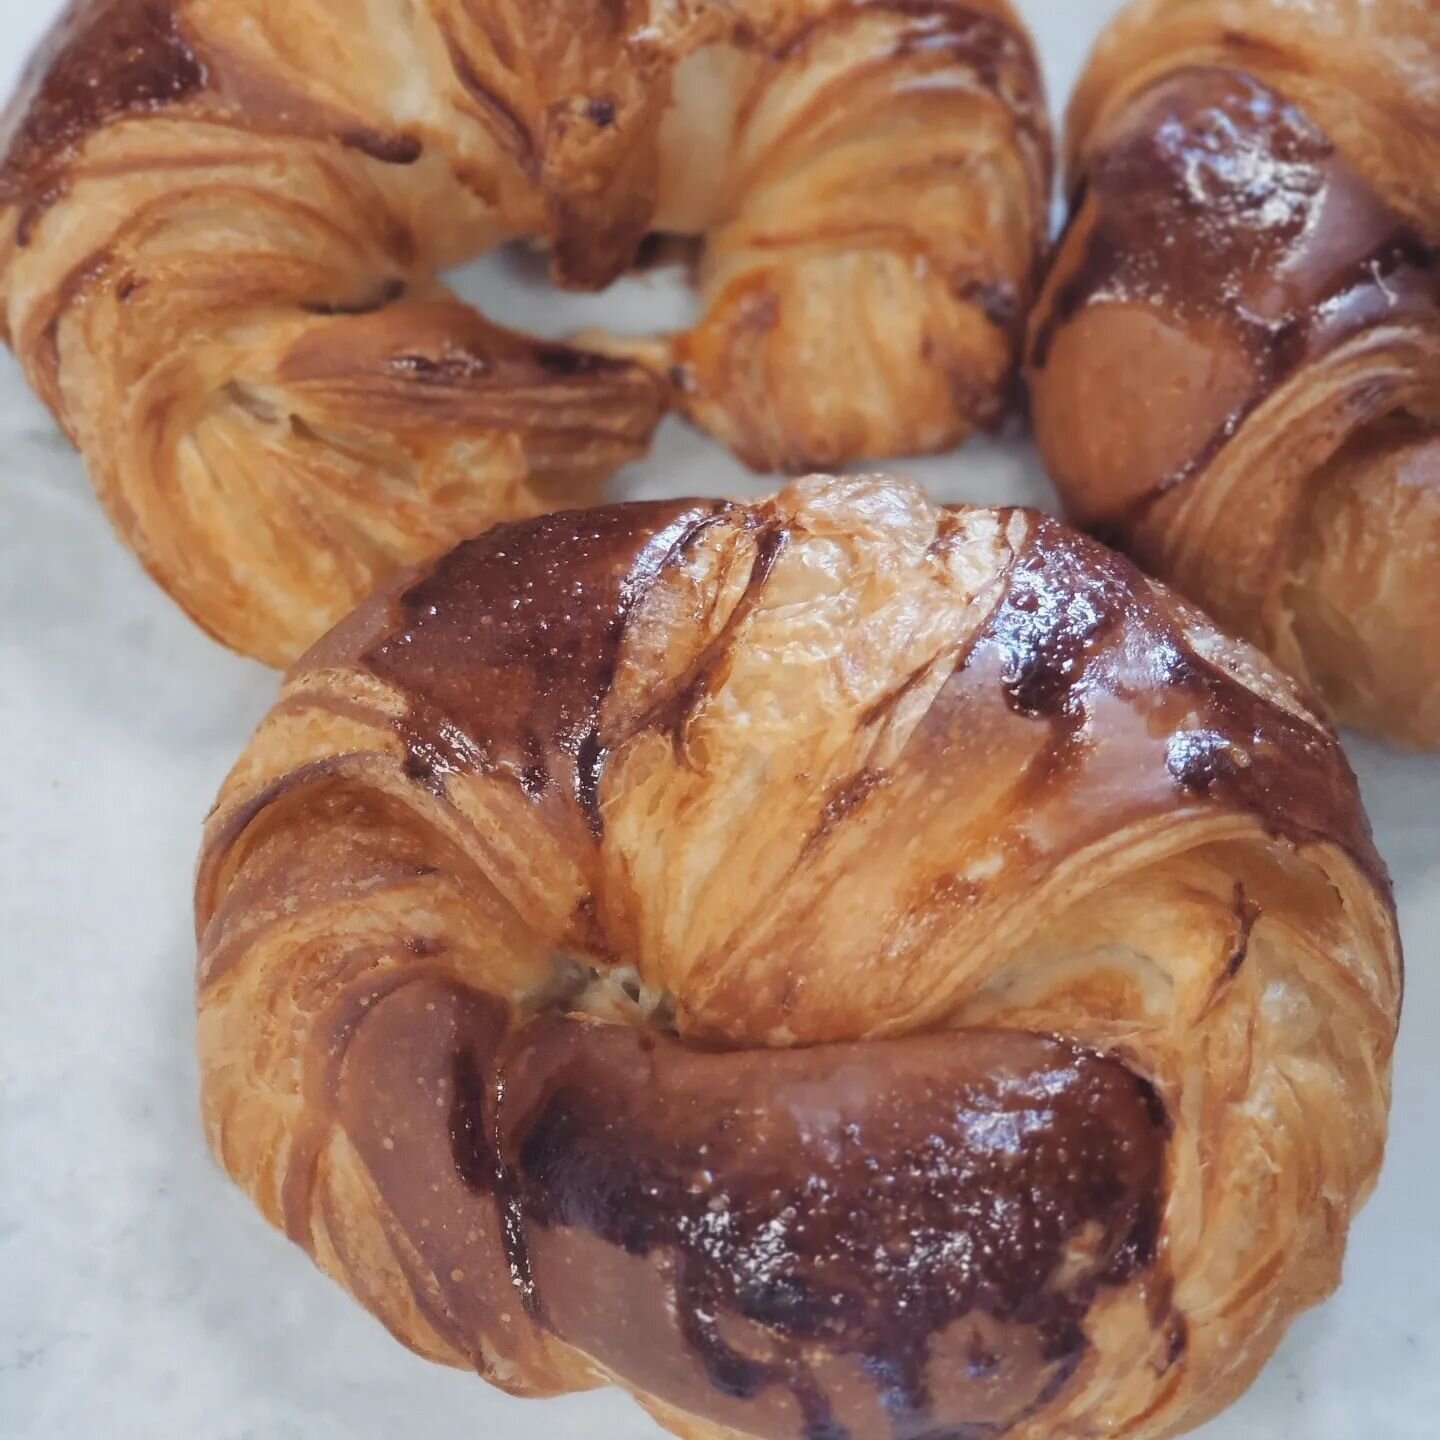 Celebrate National Croissant Day today with a flaky, buttery croissant from CocoLuxe!  We make all of our croissants in house from scratch and bake them all fresh every morning!  They go fast, so get them early!  #nationalcroissantday #retailbakersof